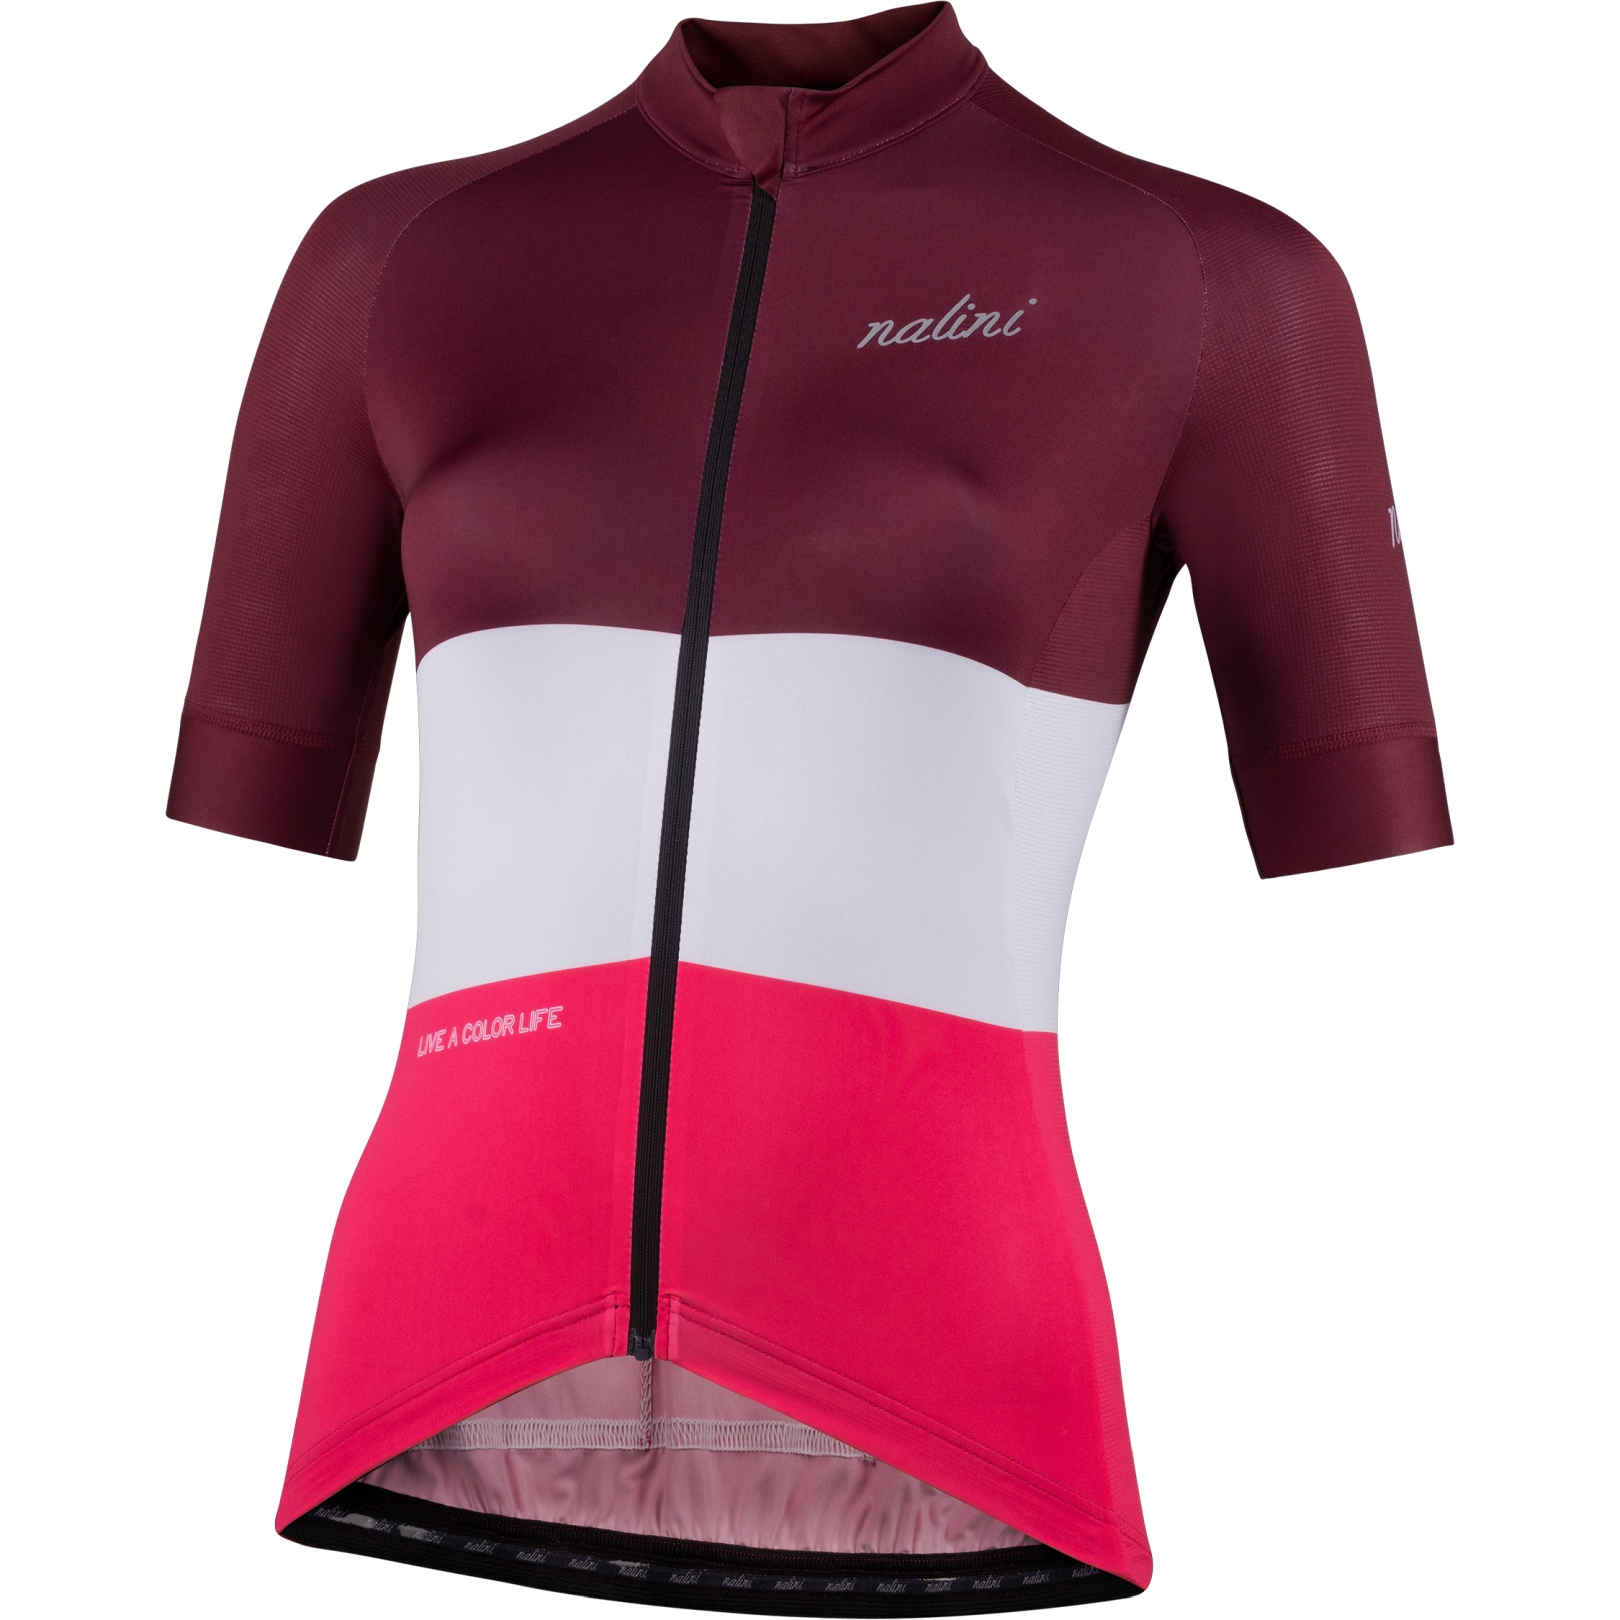 Image de Nalini Maillot Manches Courtes Femme - San Francisco - red wine/ fuxia 4700